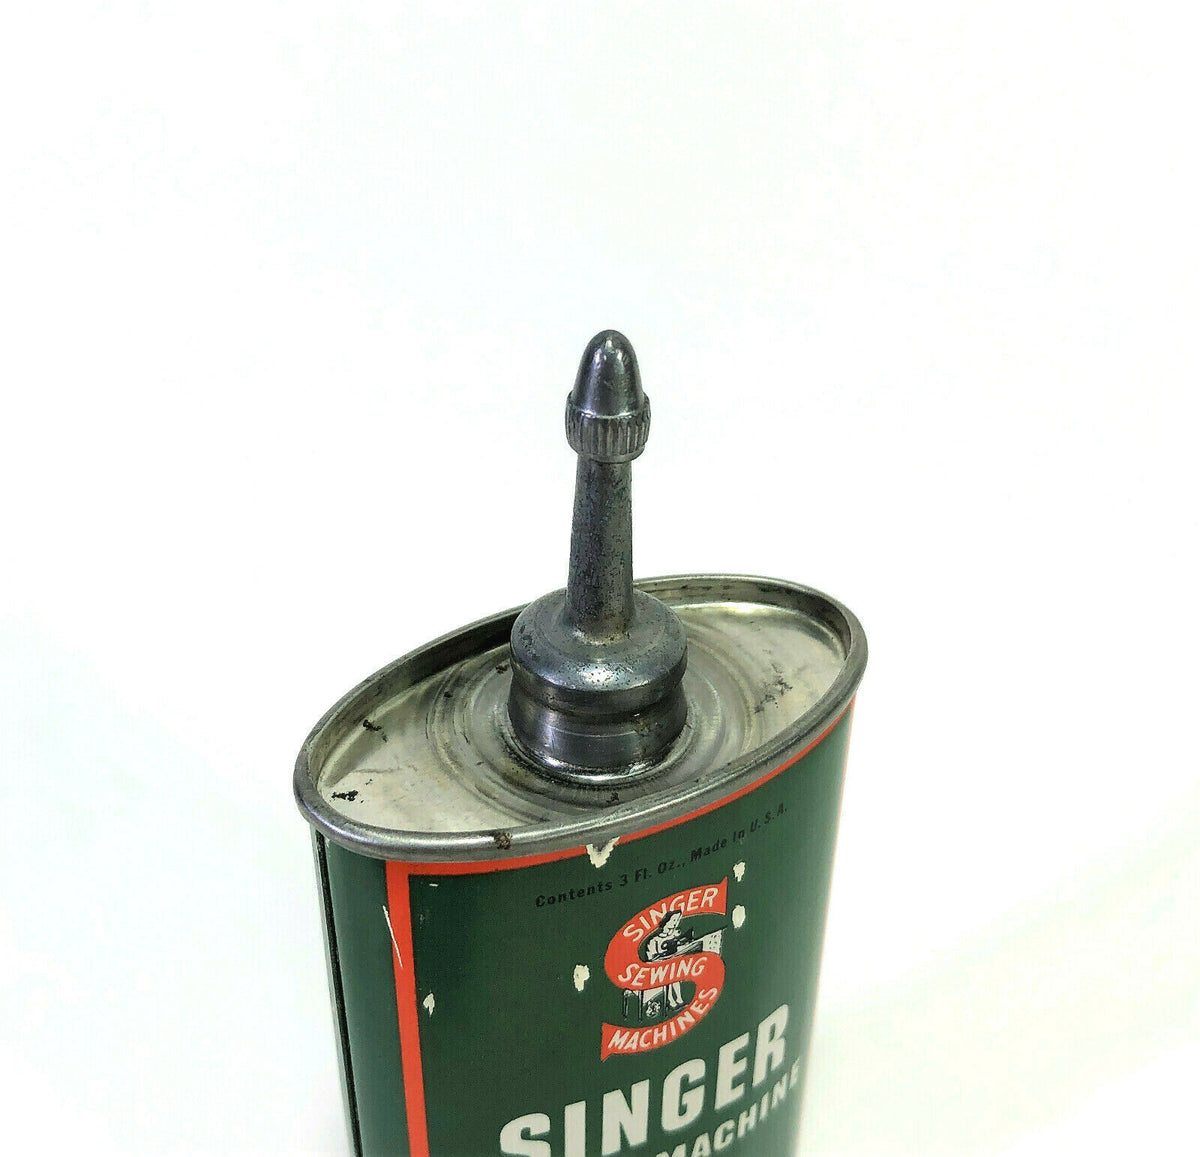 Singer Sewing Machine Oil Tin – Treasures Under Sugar Loaf – Antiques,  Collectibles, Home Decor and More